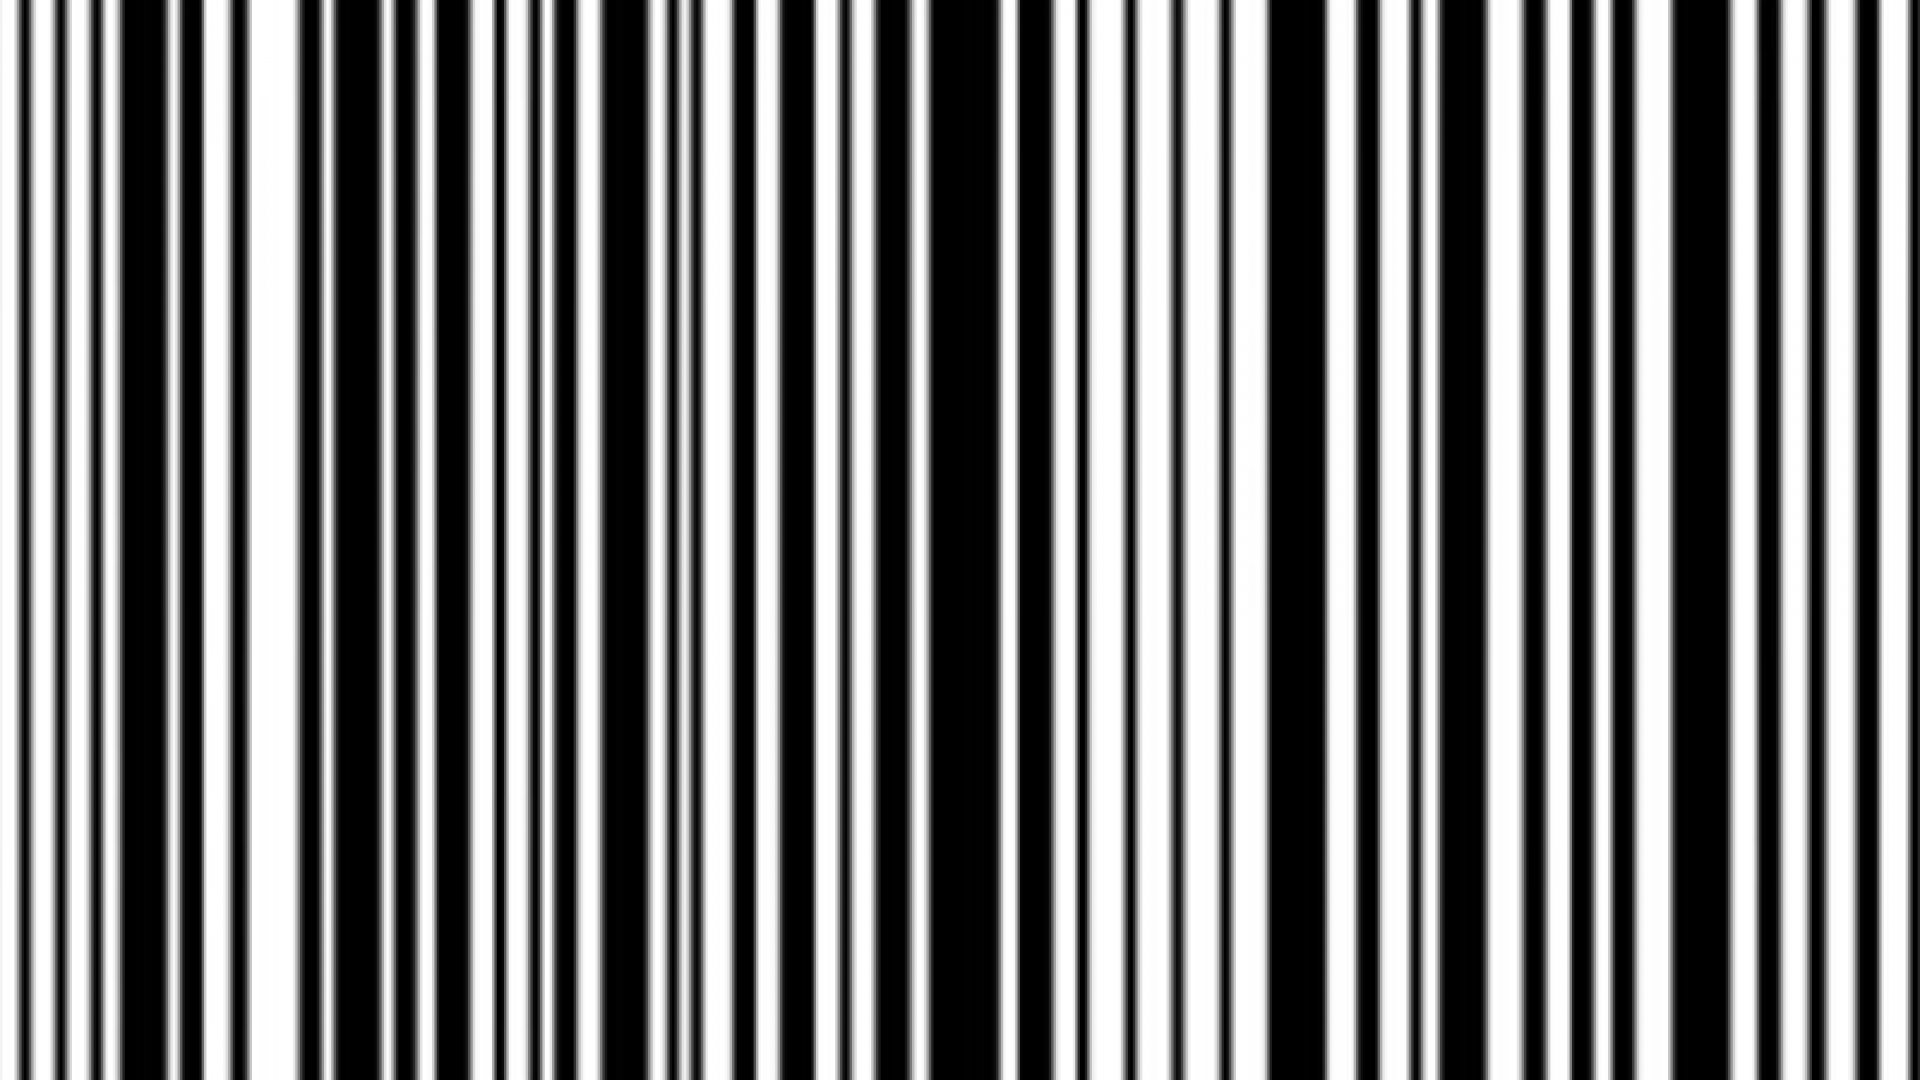 Detail Images Of Barcodes Nomer 2